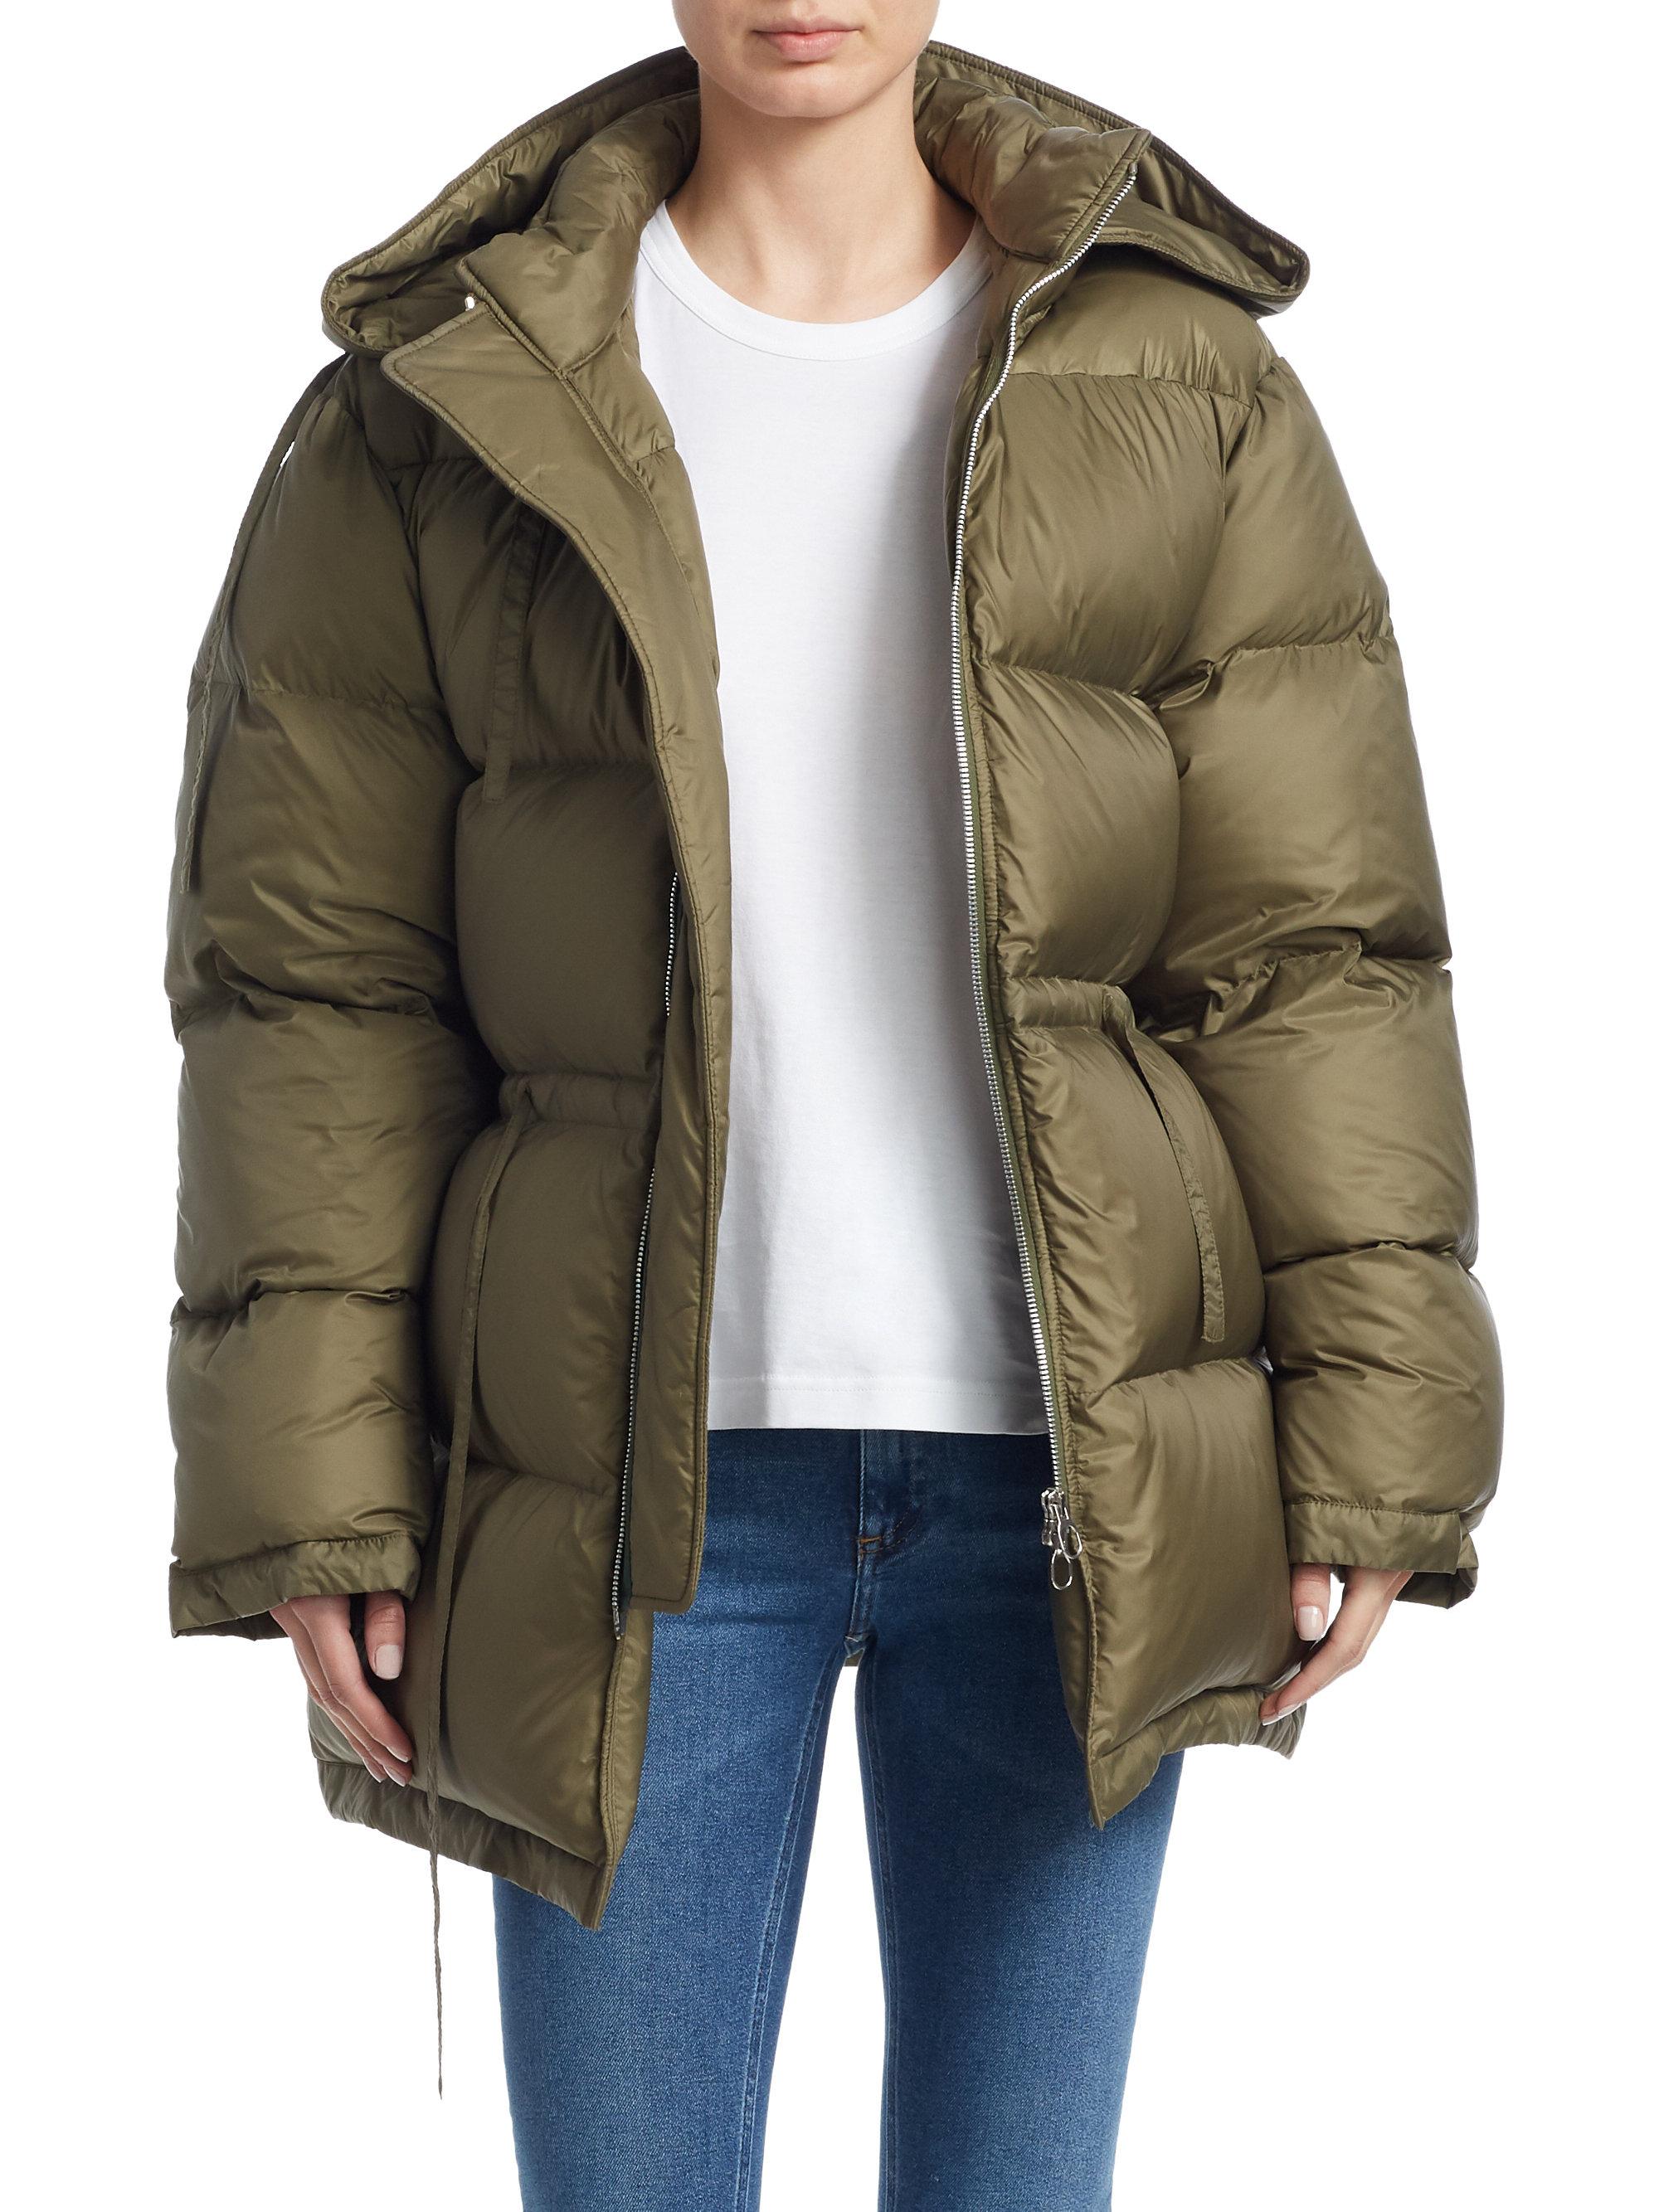 Acne Studios Cinched Waist Puffer Jacket in Olive Green (Green) - Lyst